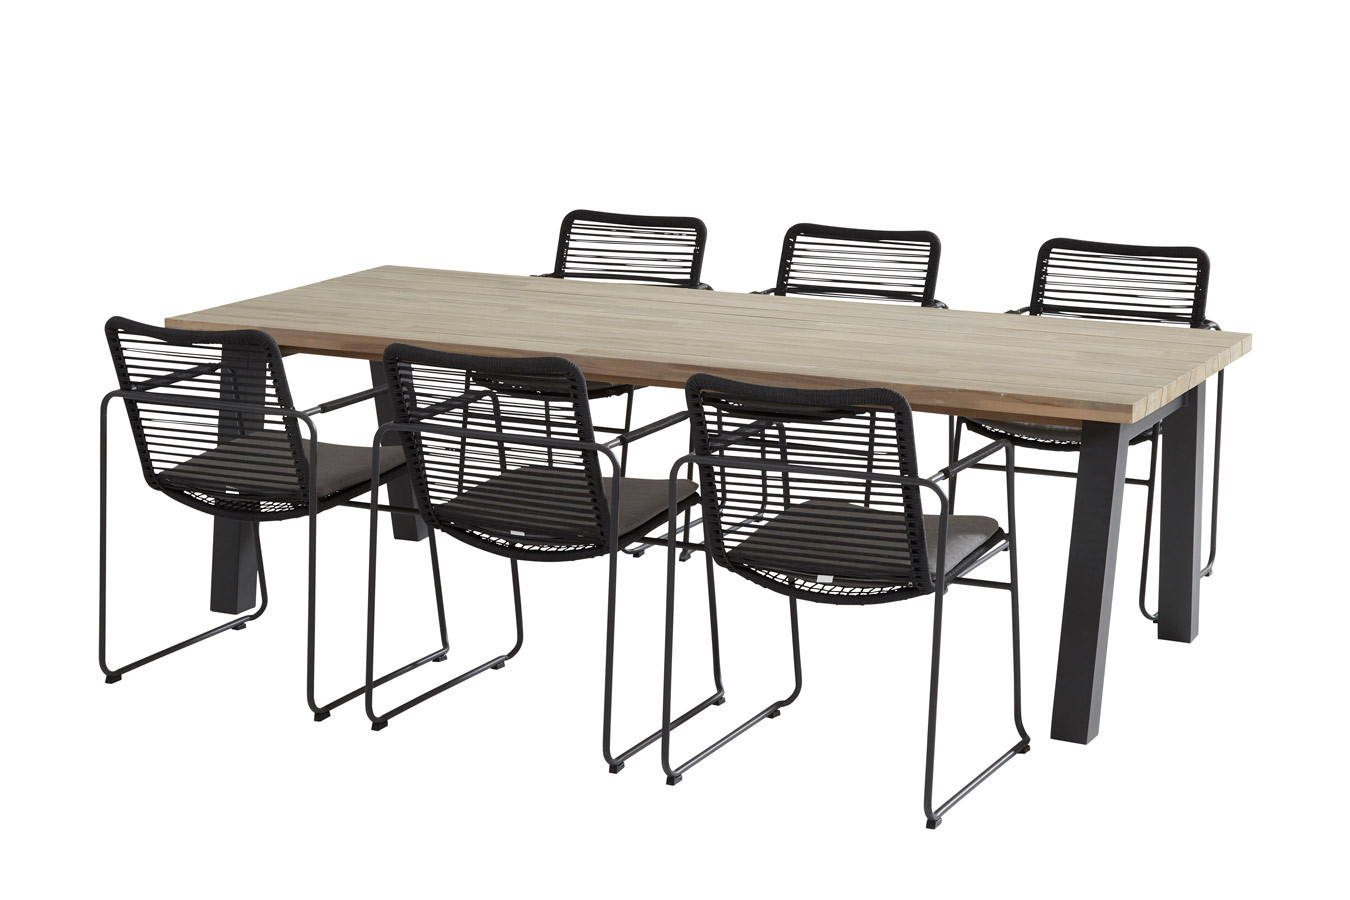 Elba dining set with Derby table 240x95cm